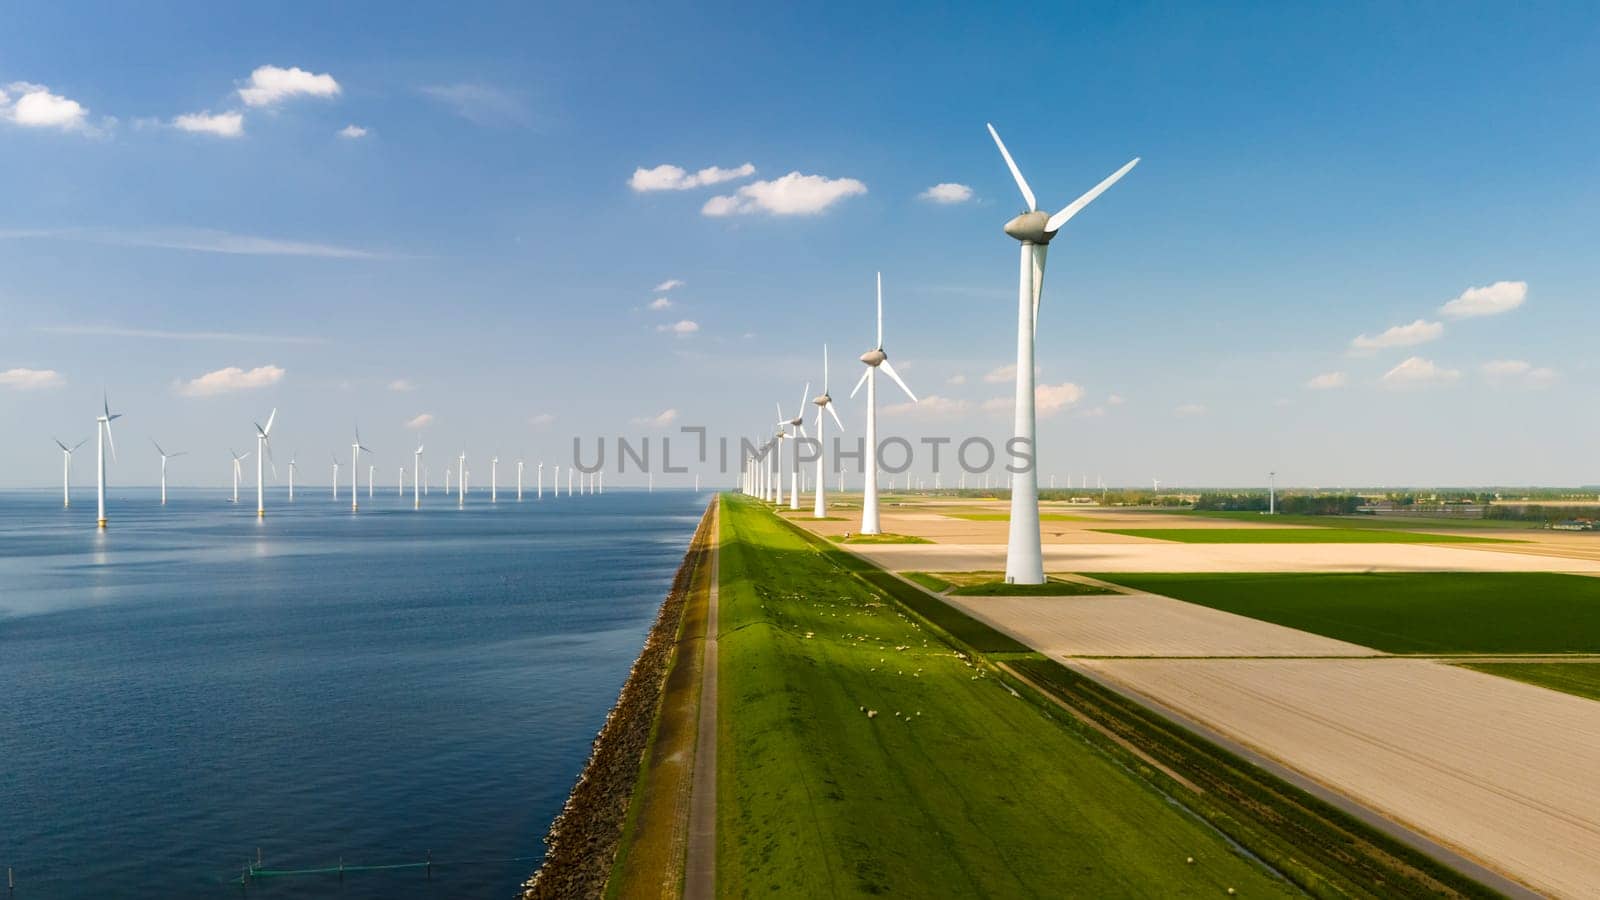 A line of majestic wind turbines stand tall next to a tranquil body of water, harnessing the power of the wind to generate energy for the surrounding area by fokkebok